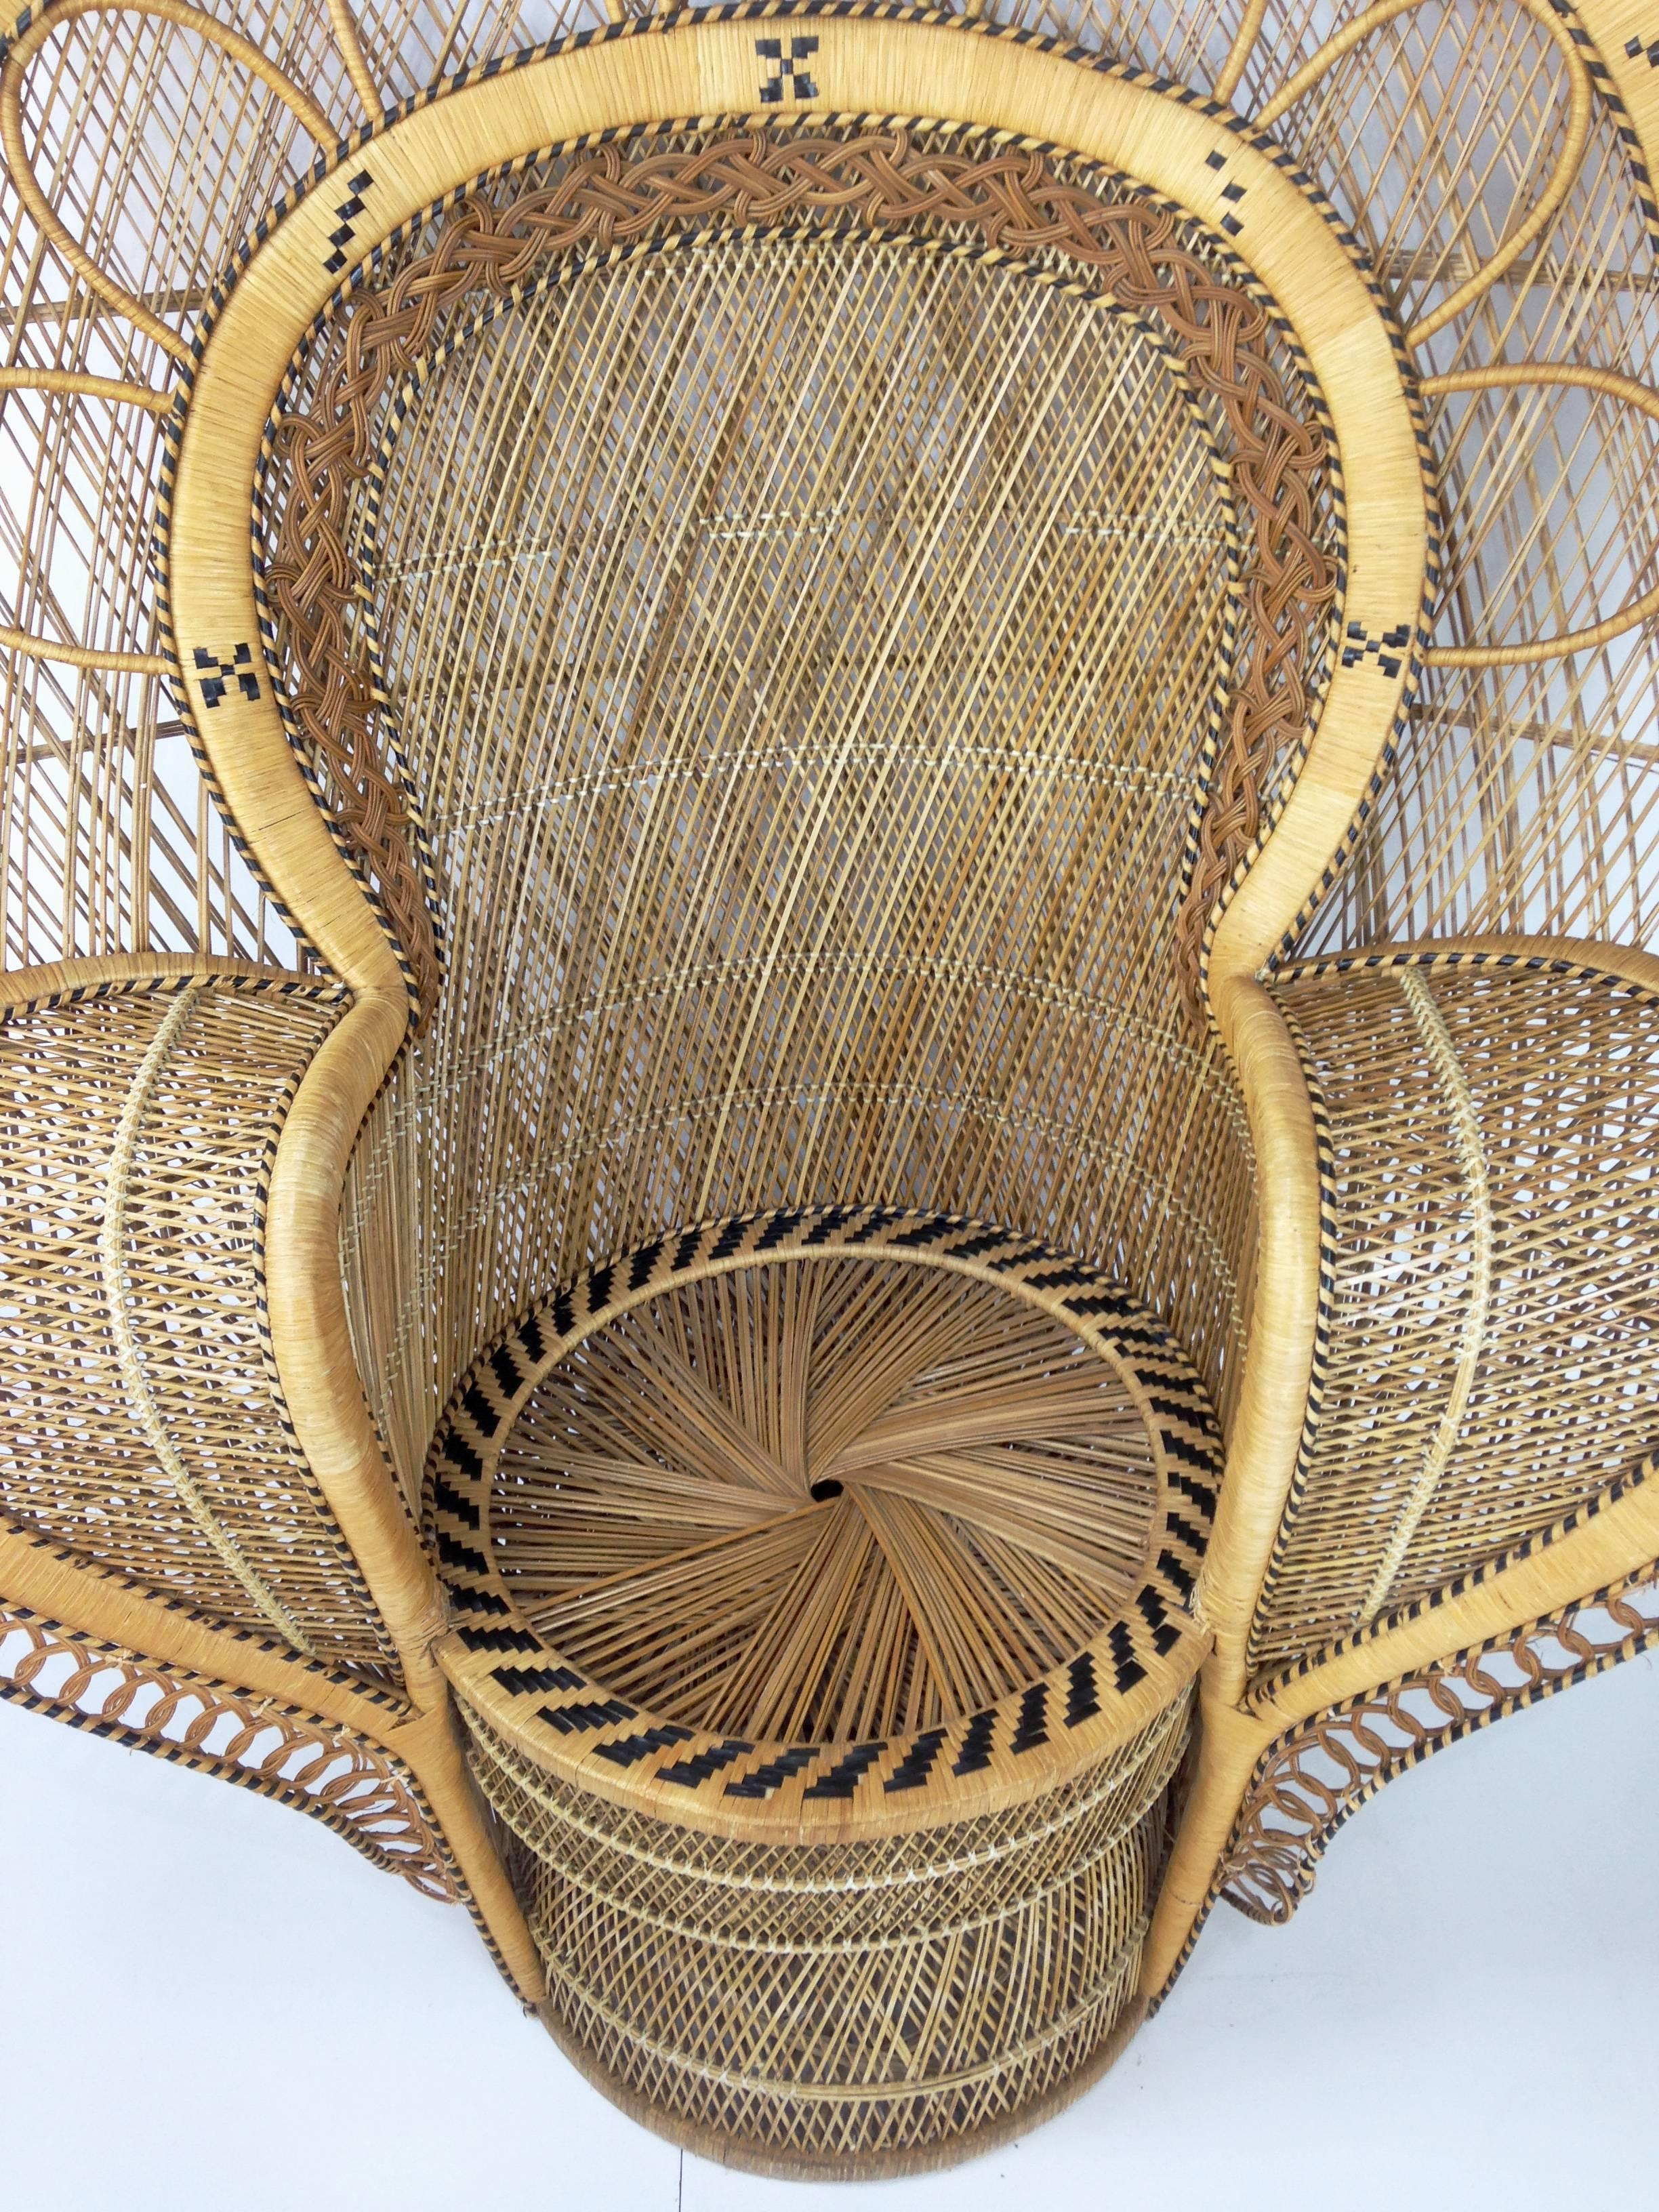 Sculptural and monumental (the only one with this scale!) Emmanuelle wicker and French armchair from the 1970s in incredible state of conservation. Vintage style centerpiece with a bohemian chic look!